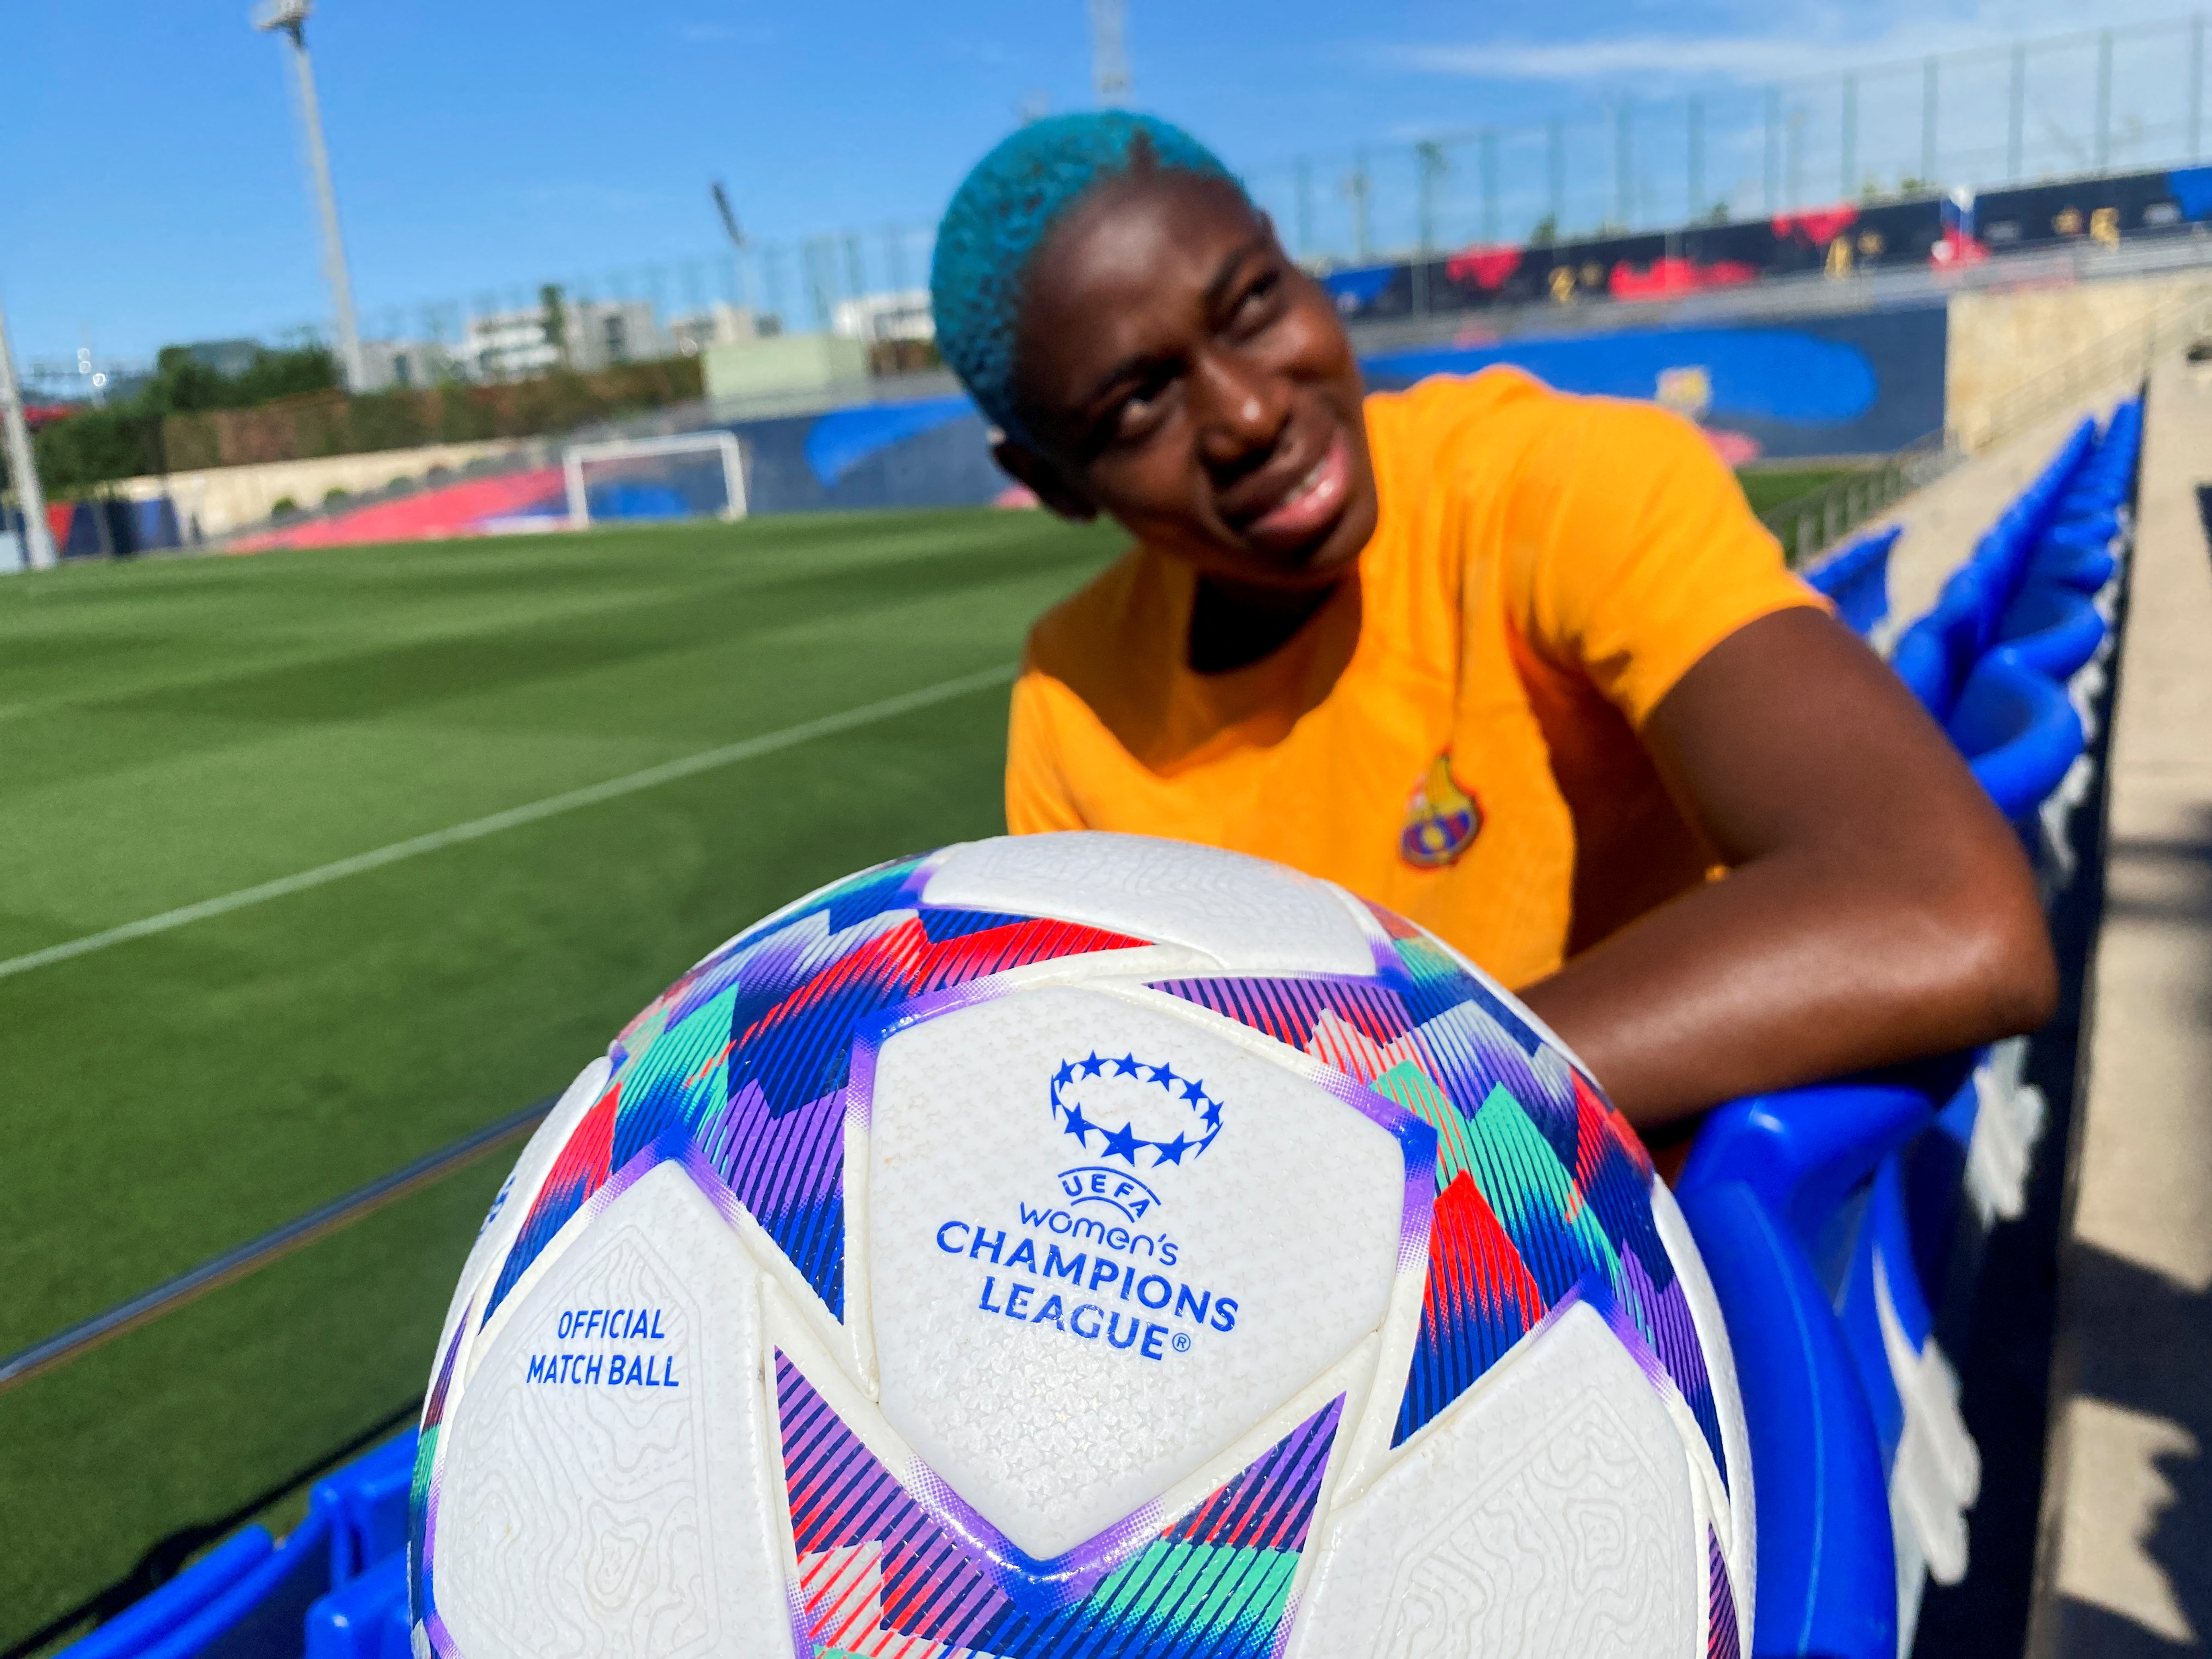 Soccer-'Get used to it' - women's football is the future, says Barca's Oshoala